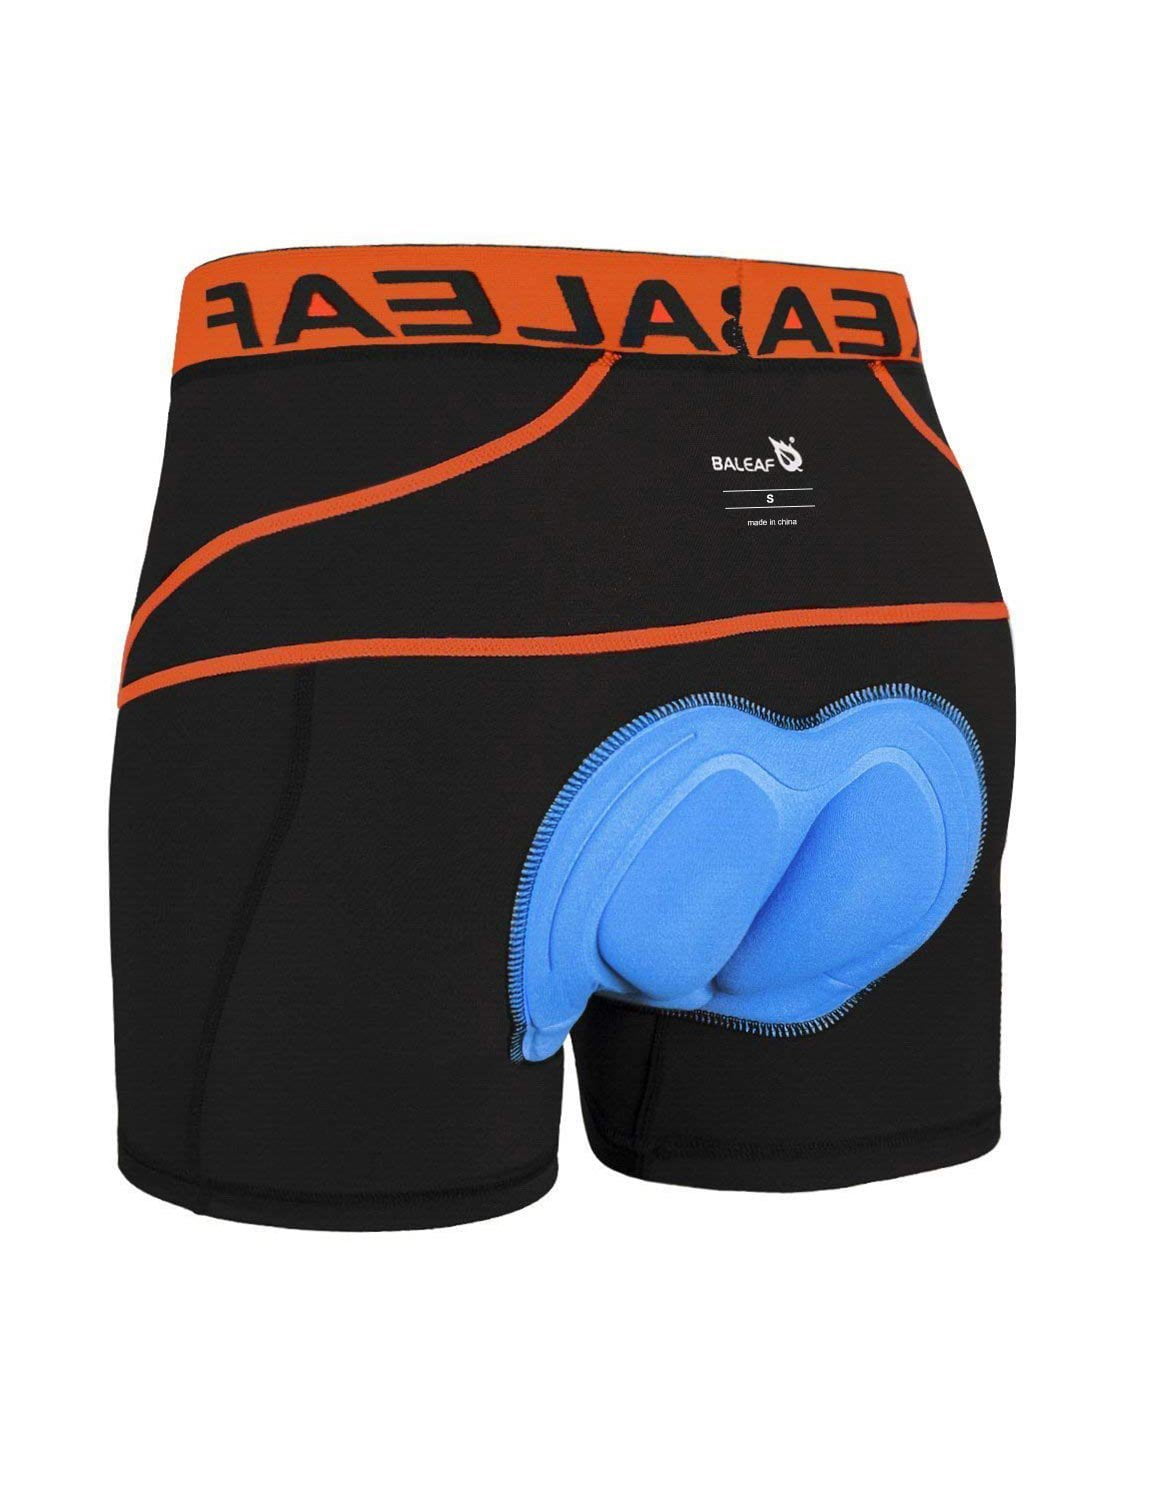 Mengove Comfortable Bicycle Cycling Underwear Men And Women Padded Shorts Unisex 3D Padded Bicycle Cycling Underwear Sponge 